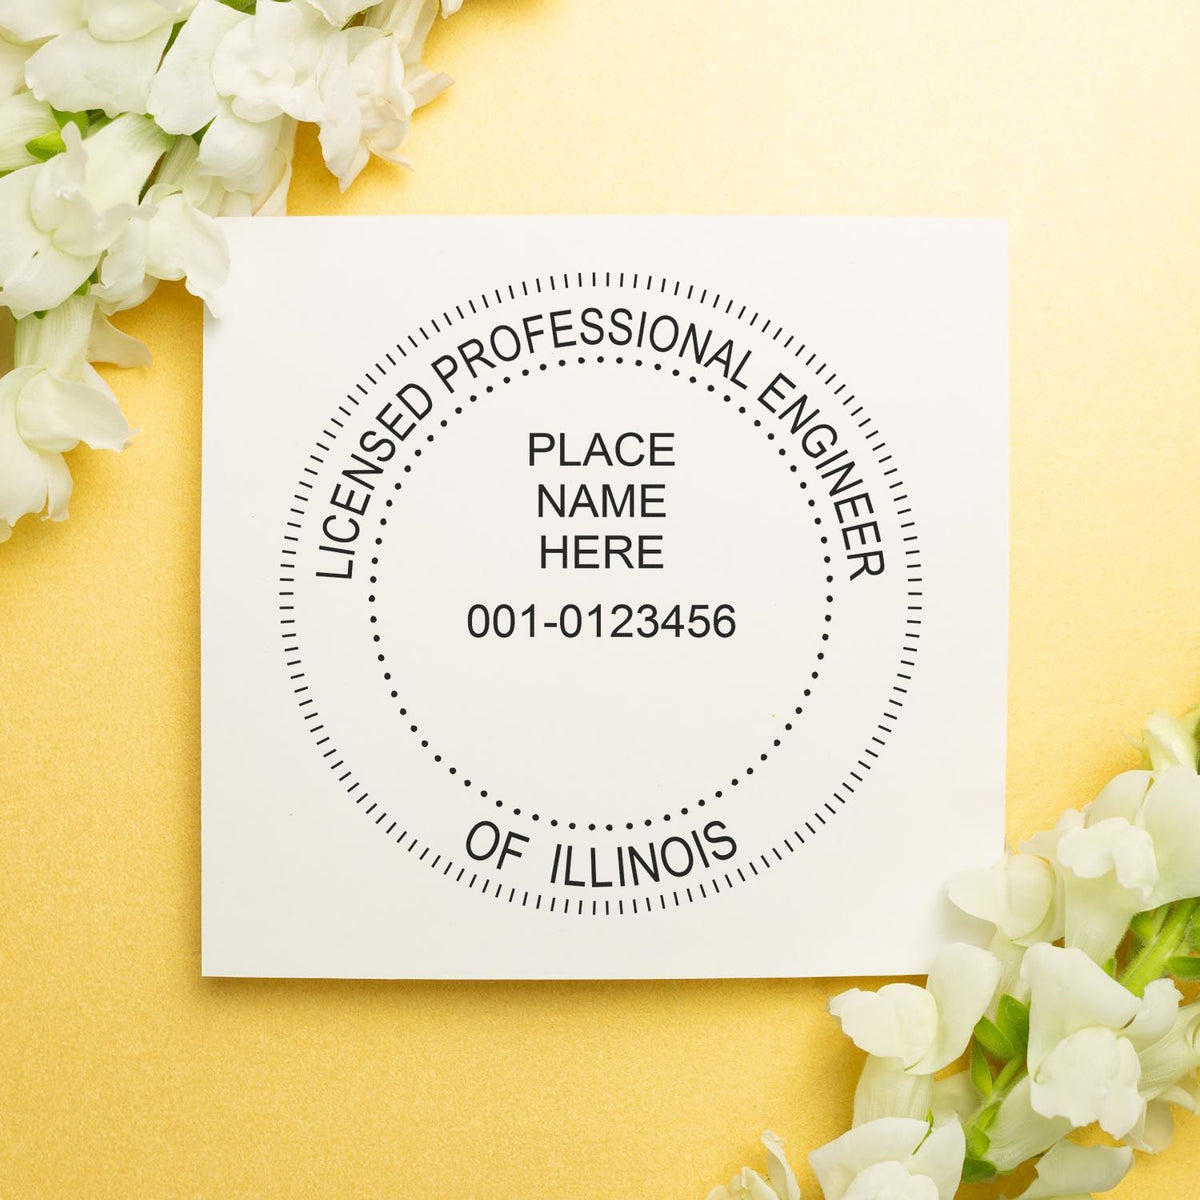 This paper is stamped with a sample imprint of the Illinois Professional Engineer Seal Stamp, signifying its quality and reliability.